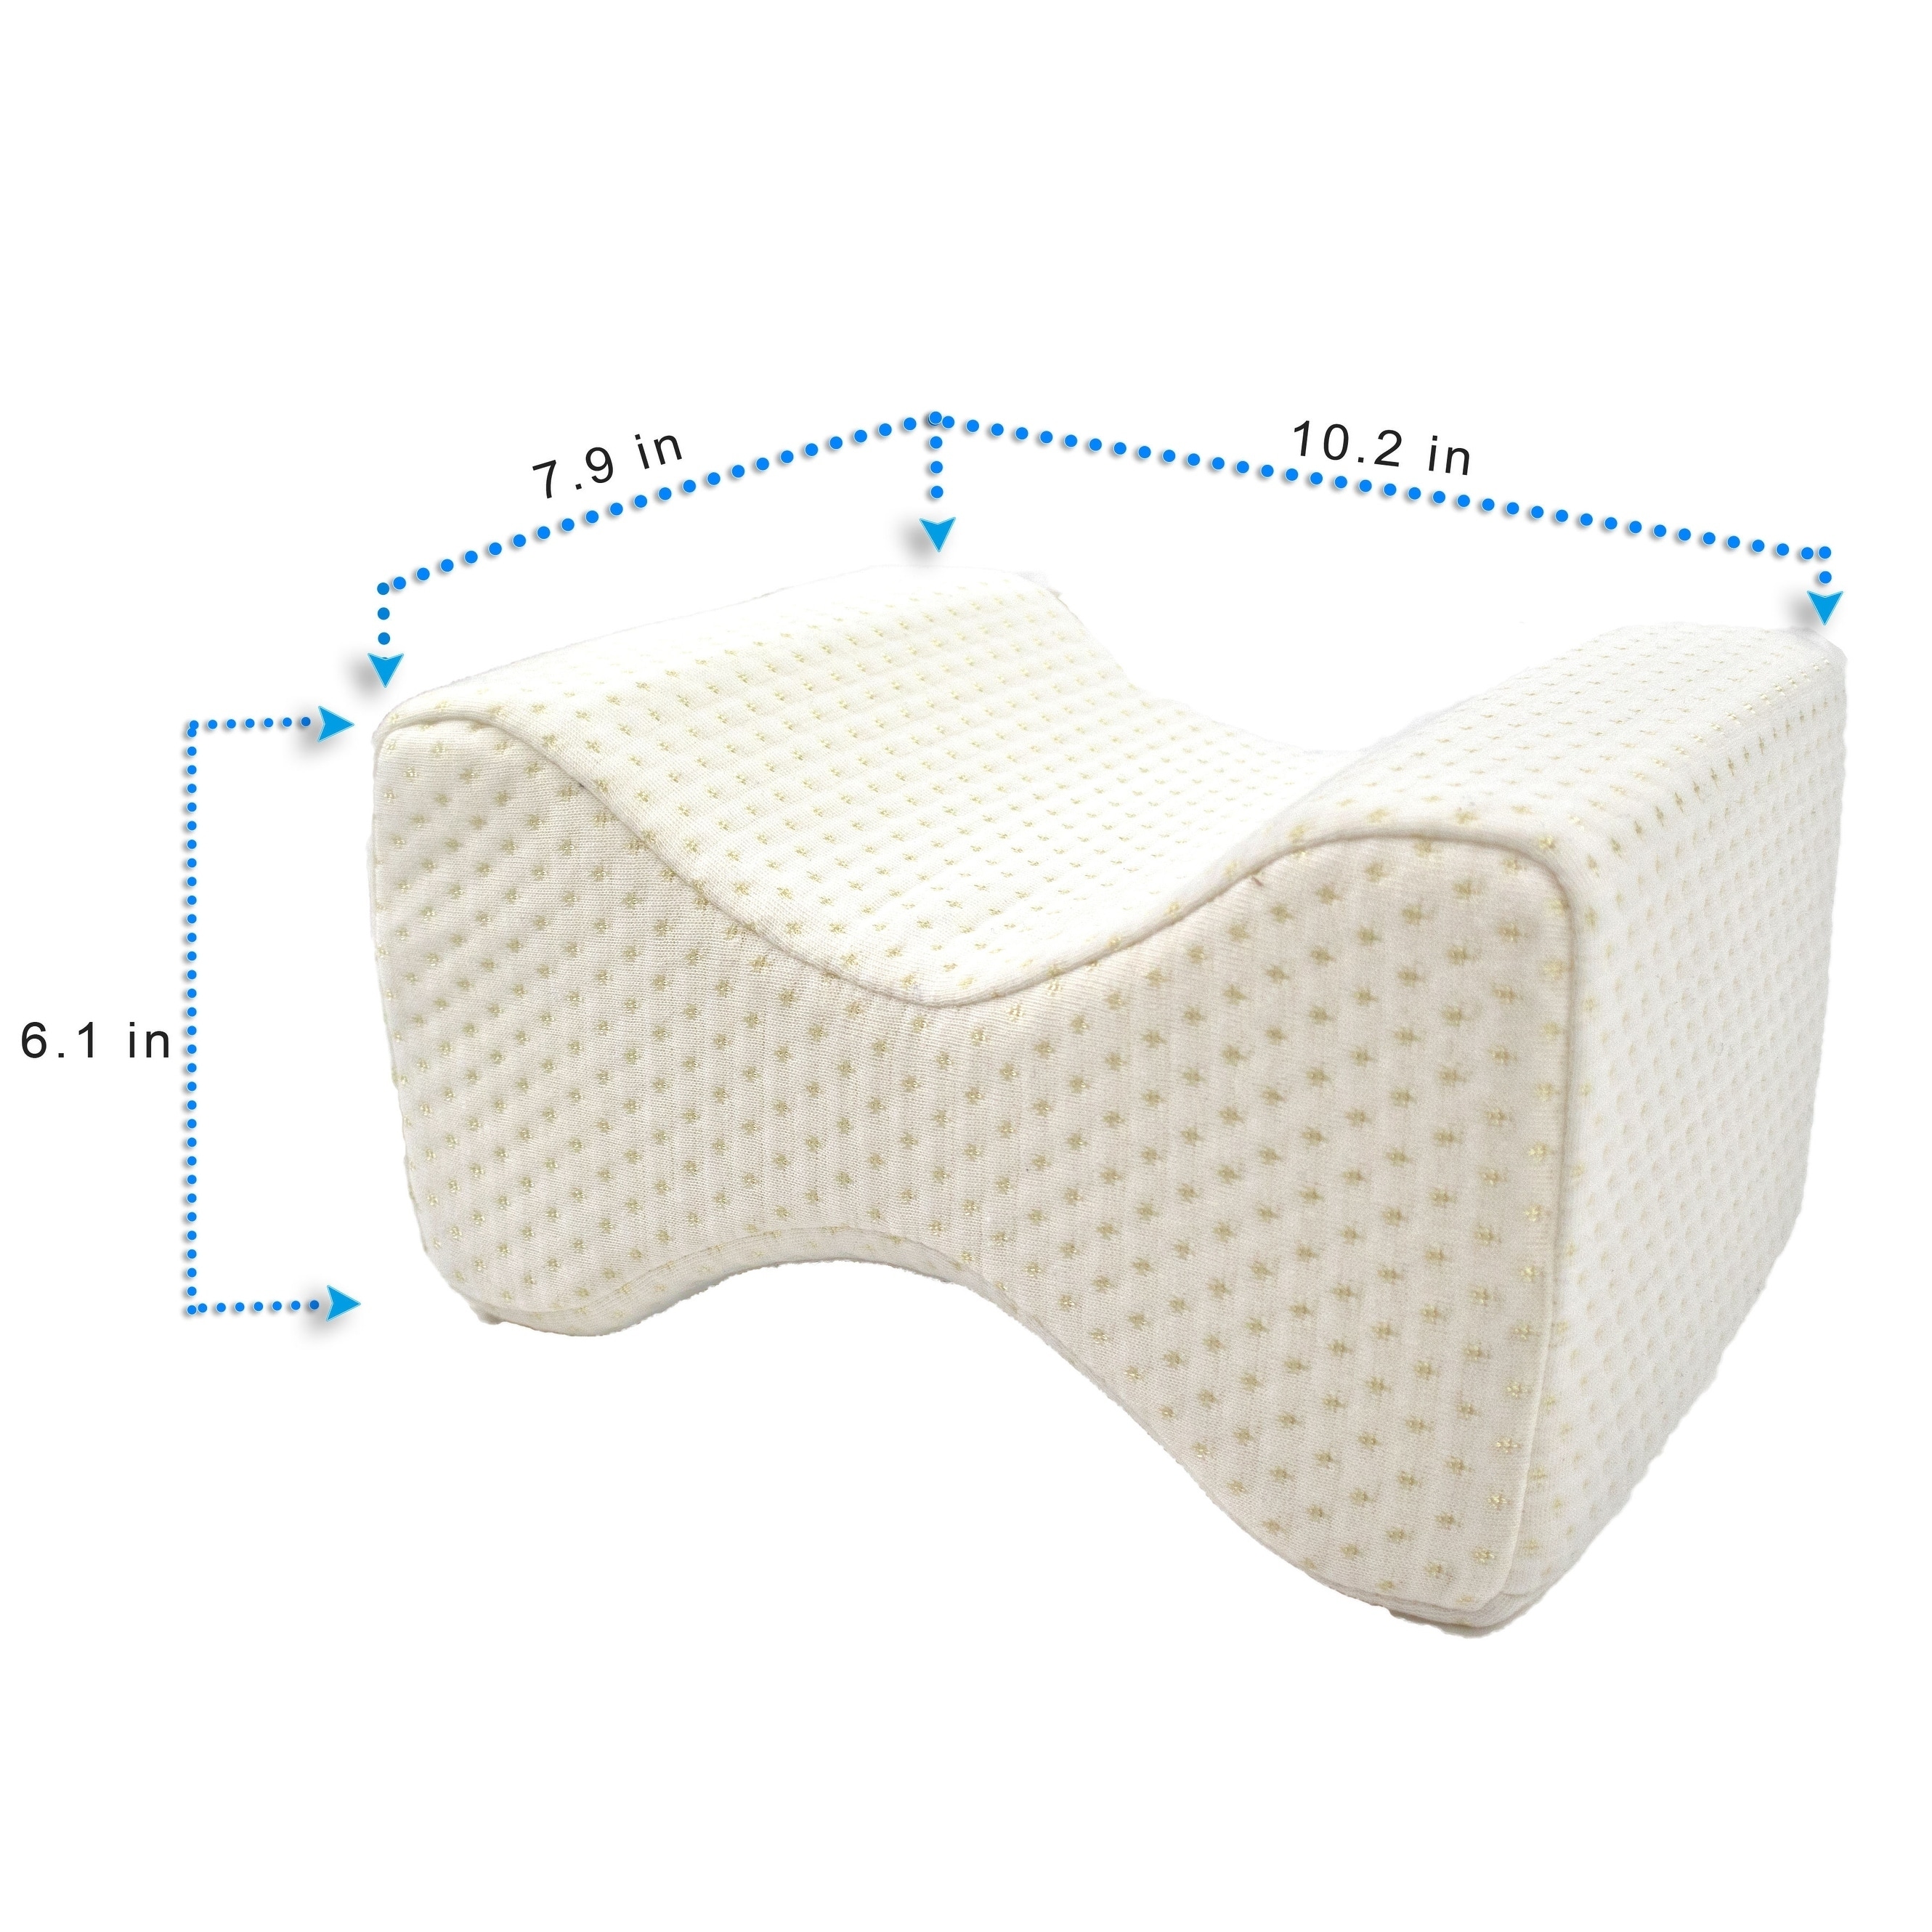 Standard Size White Sleep Philosophy Leg Knee Pain Relief Spinal Alignment Pregnancy Pillow for Side Sleeper